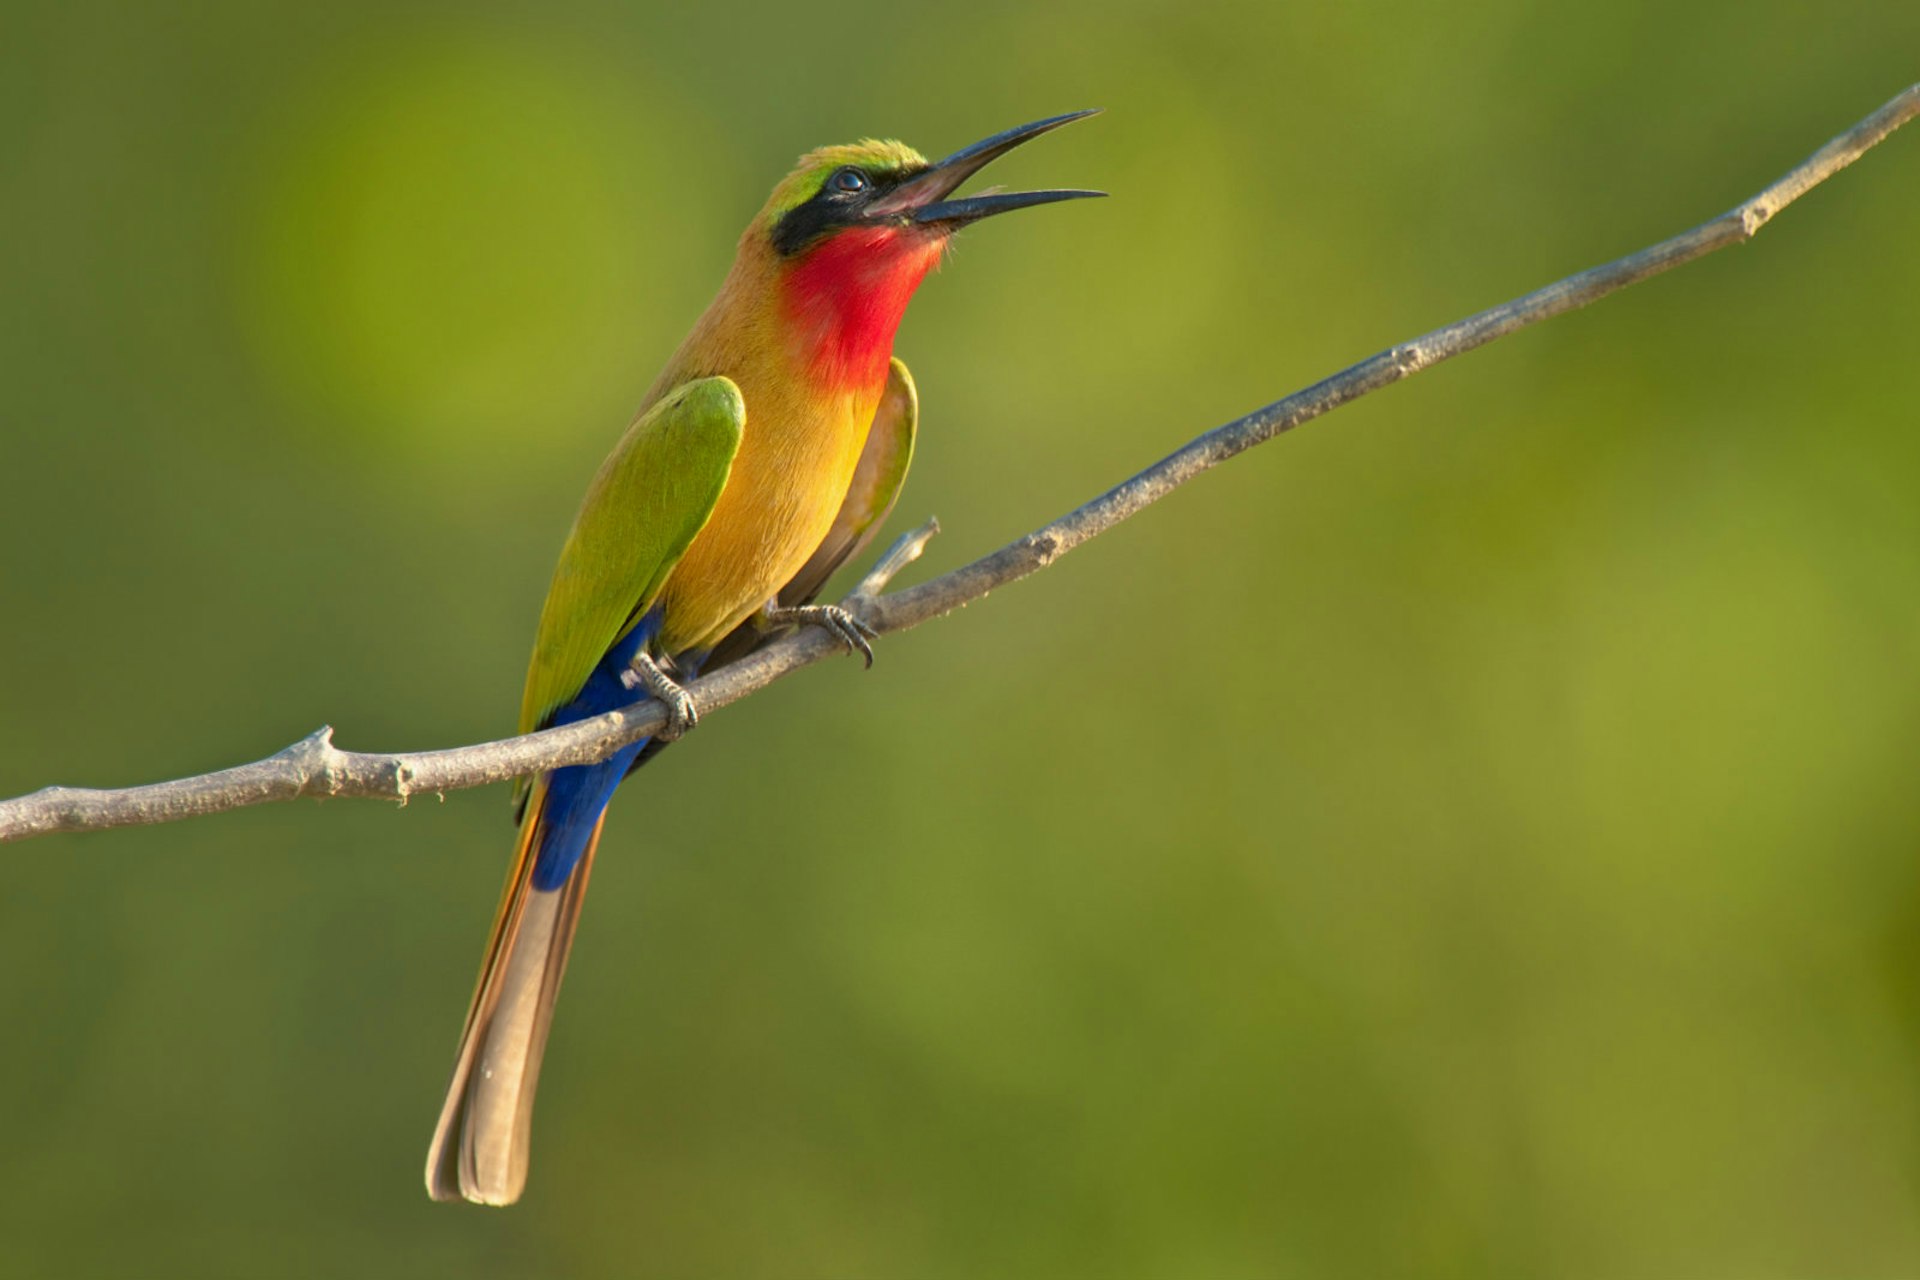 Red-throated bee-eater in Mole National Park © Mint Images / Frans Lanting / Getty Images